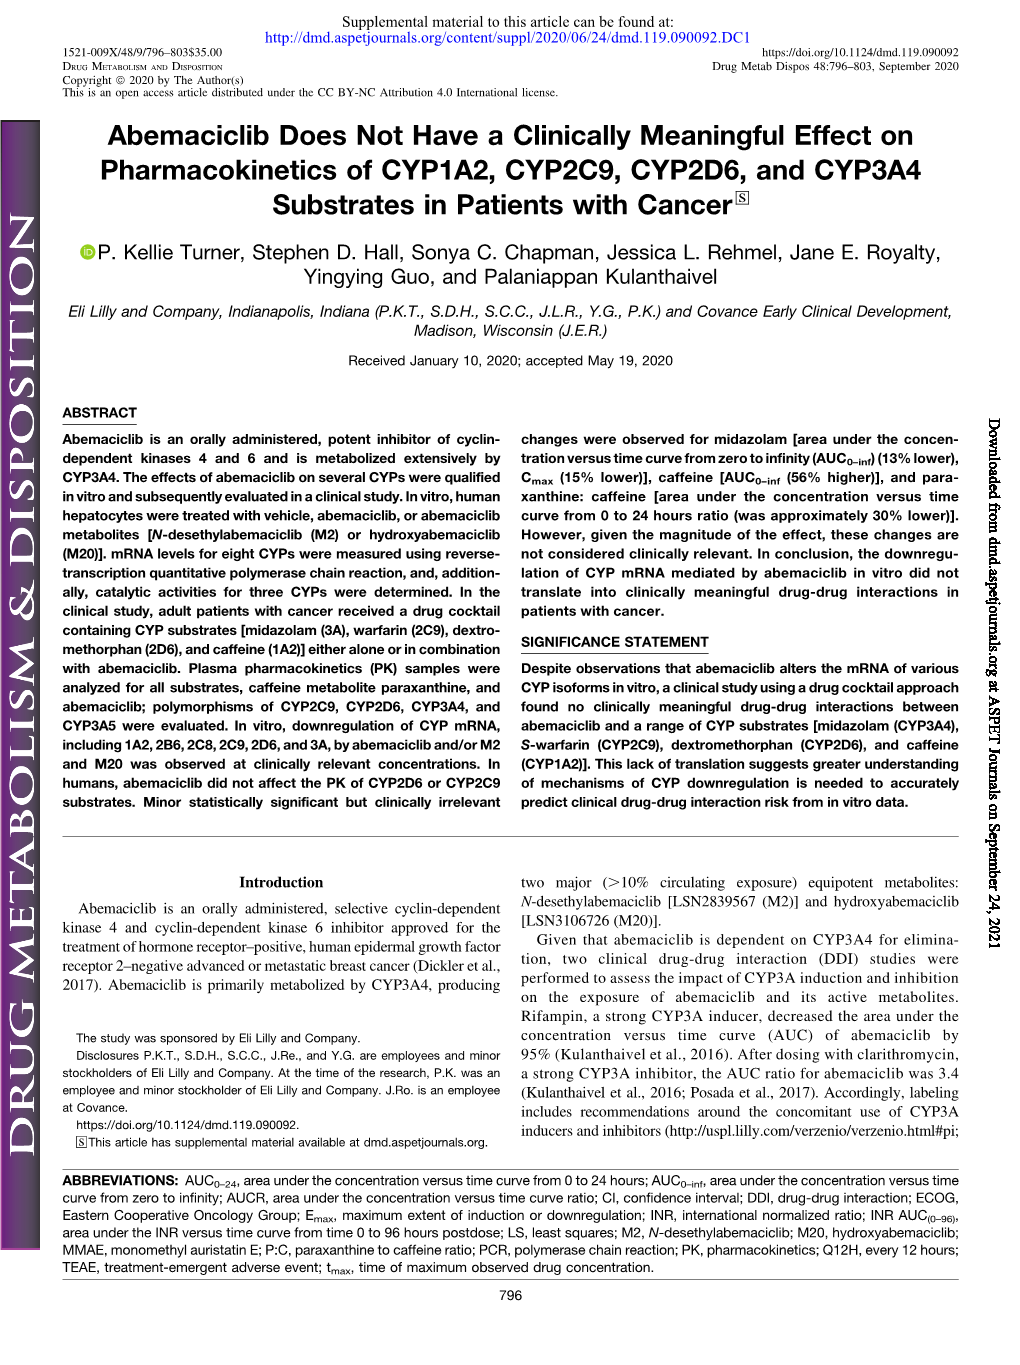 Abemaciclib Does Not Have a Clinically Meaningful Effect on Pharmacokinetics of CYP1A2, CYP2C9, CYP2D6, and CYP3A4 Substrates in Patients with Cancer S